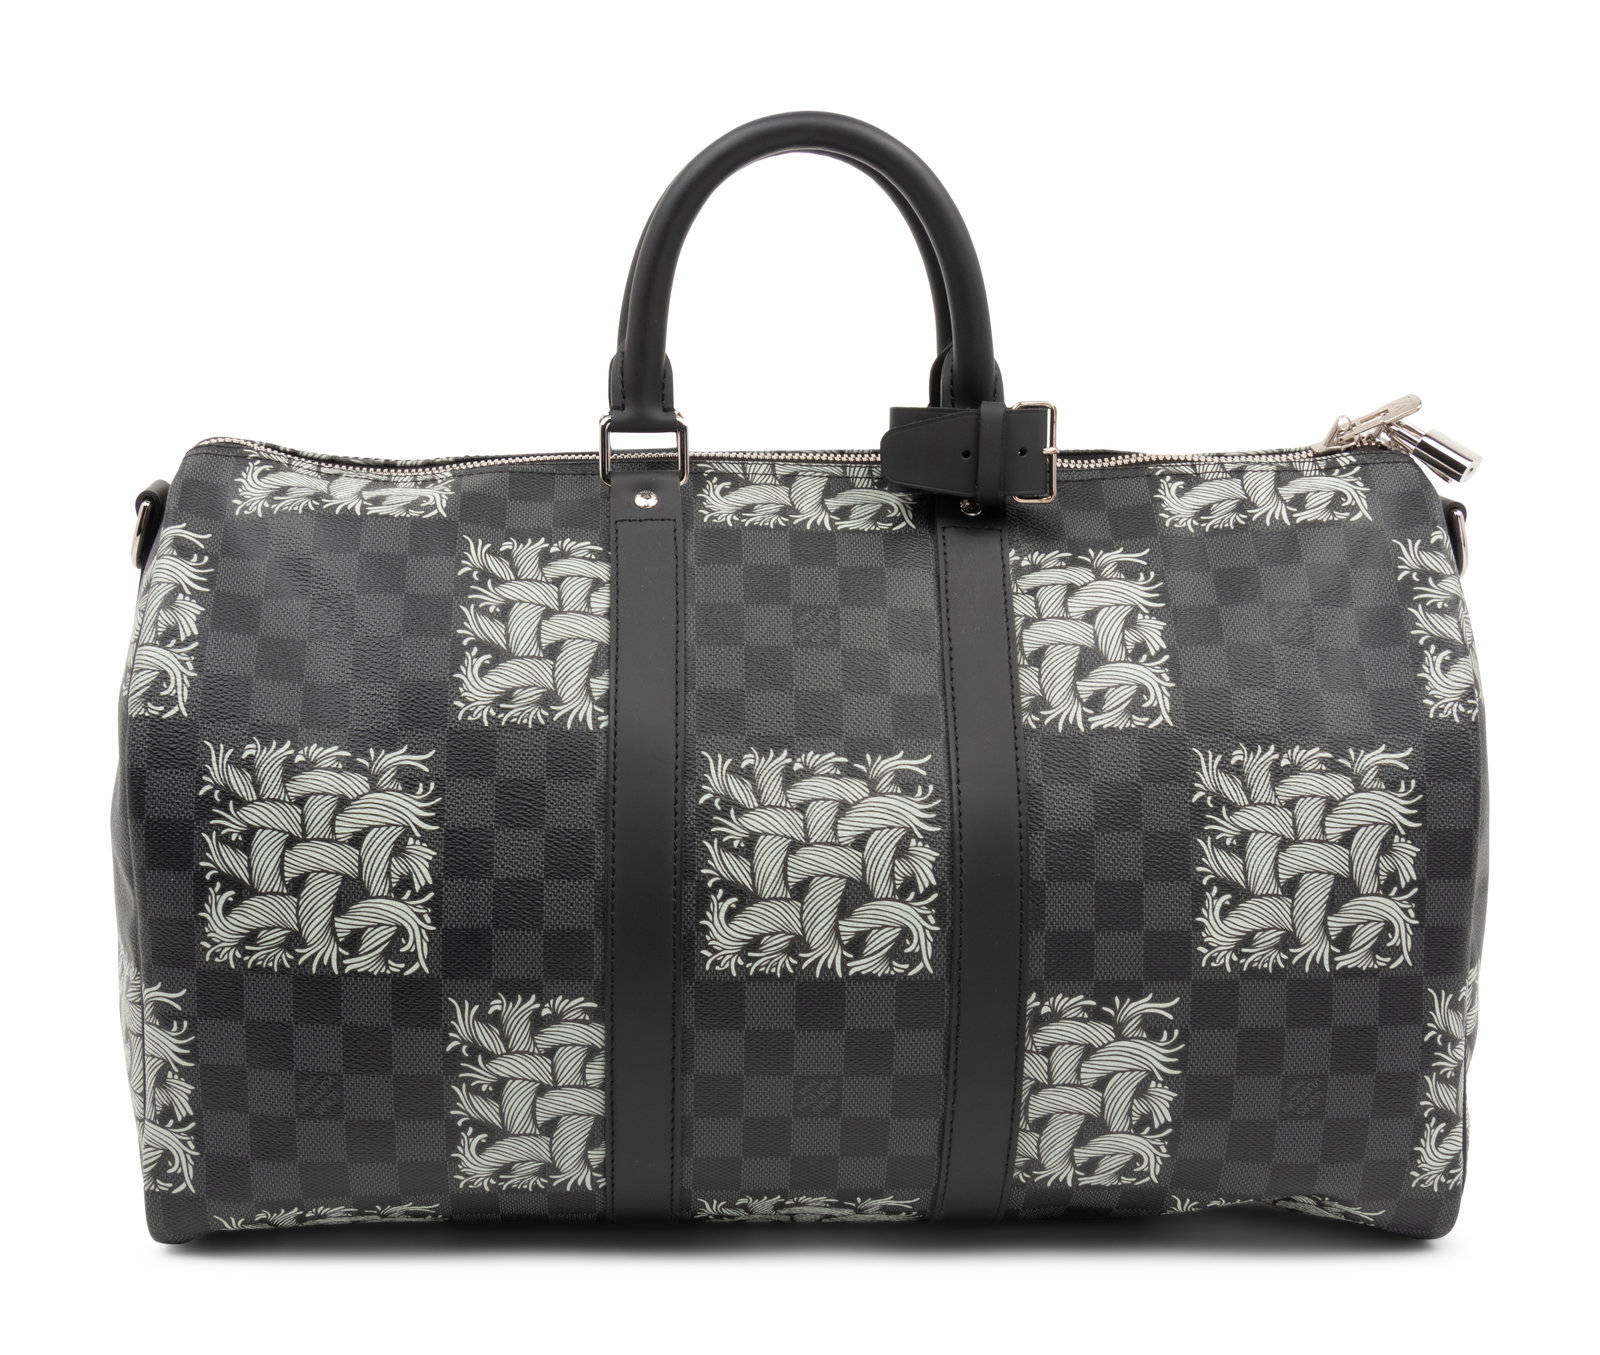 Louis Vuitton Limited Edition Keepall Bandoulière 45 in Damier Graphite,  Rope, Christopher Nemeth, Fall Winter 2015-2016